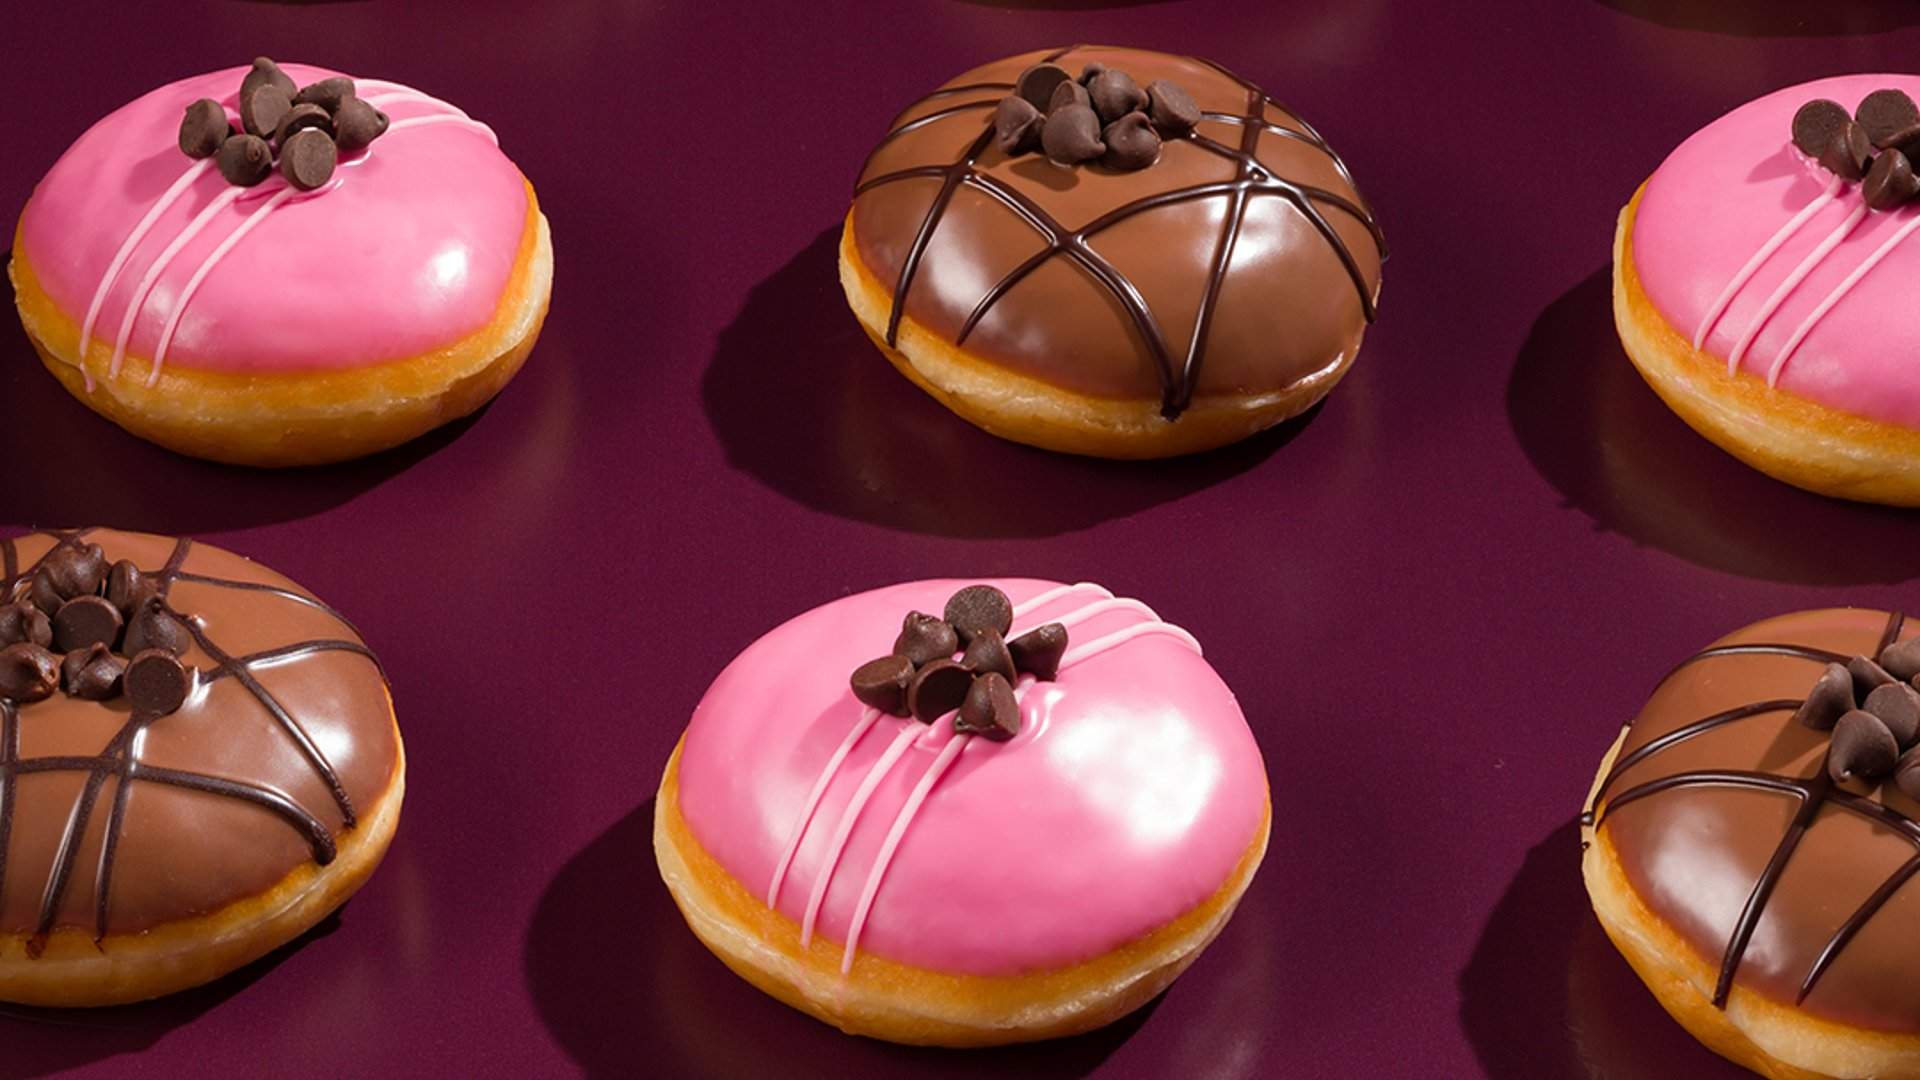 Krispy Kreme Has Teamed Up with Hershey's to Create the Ultimate Chocolate Doughnuts of Your Dreams